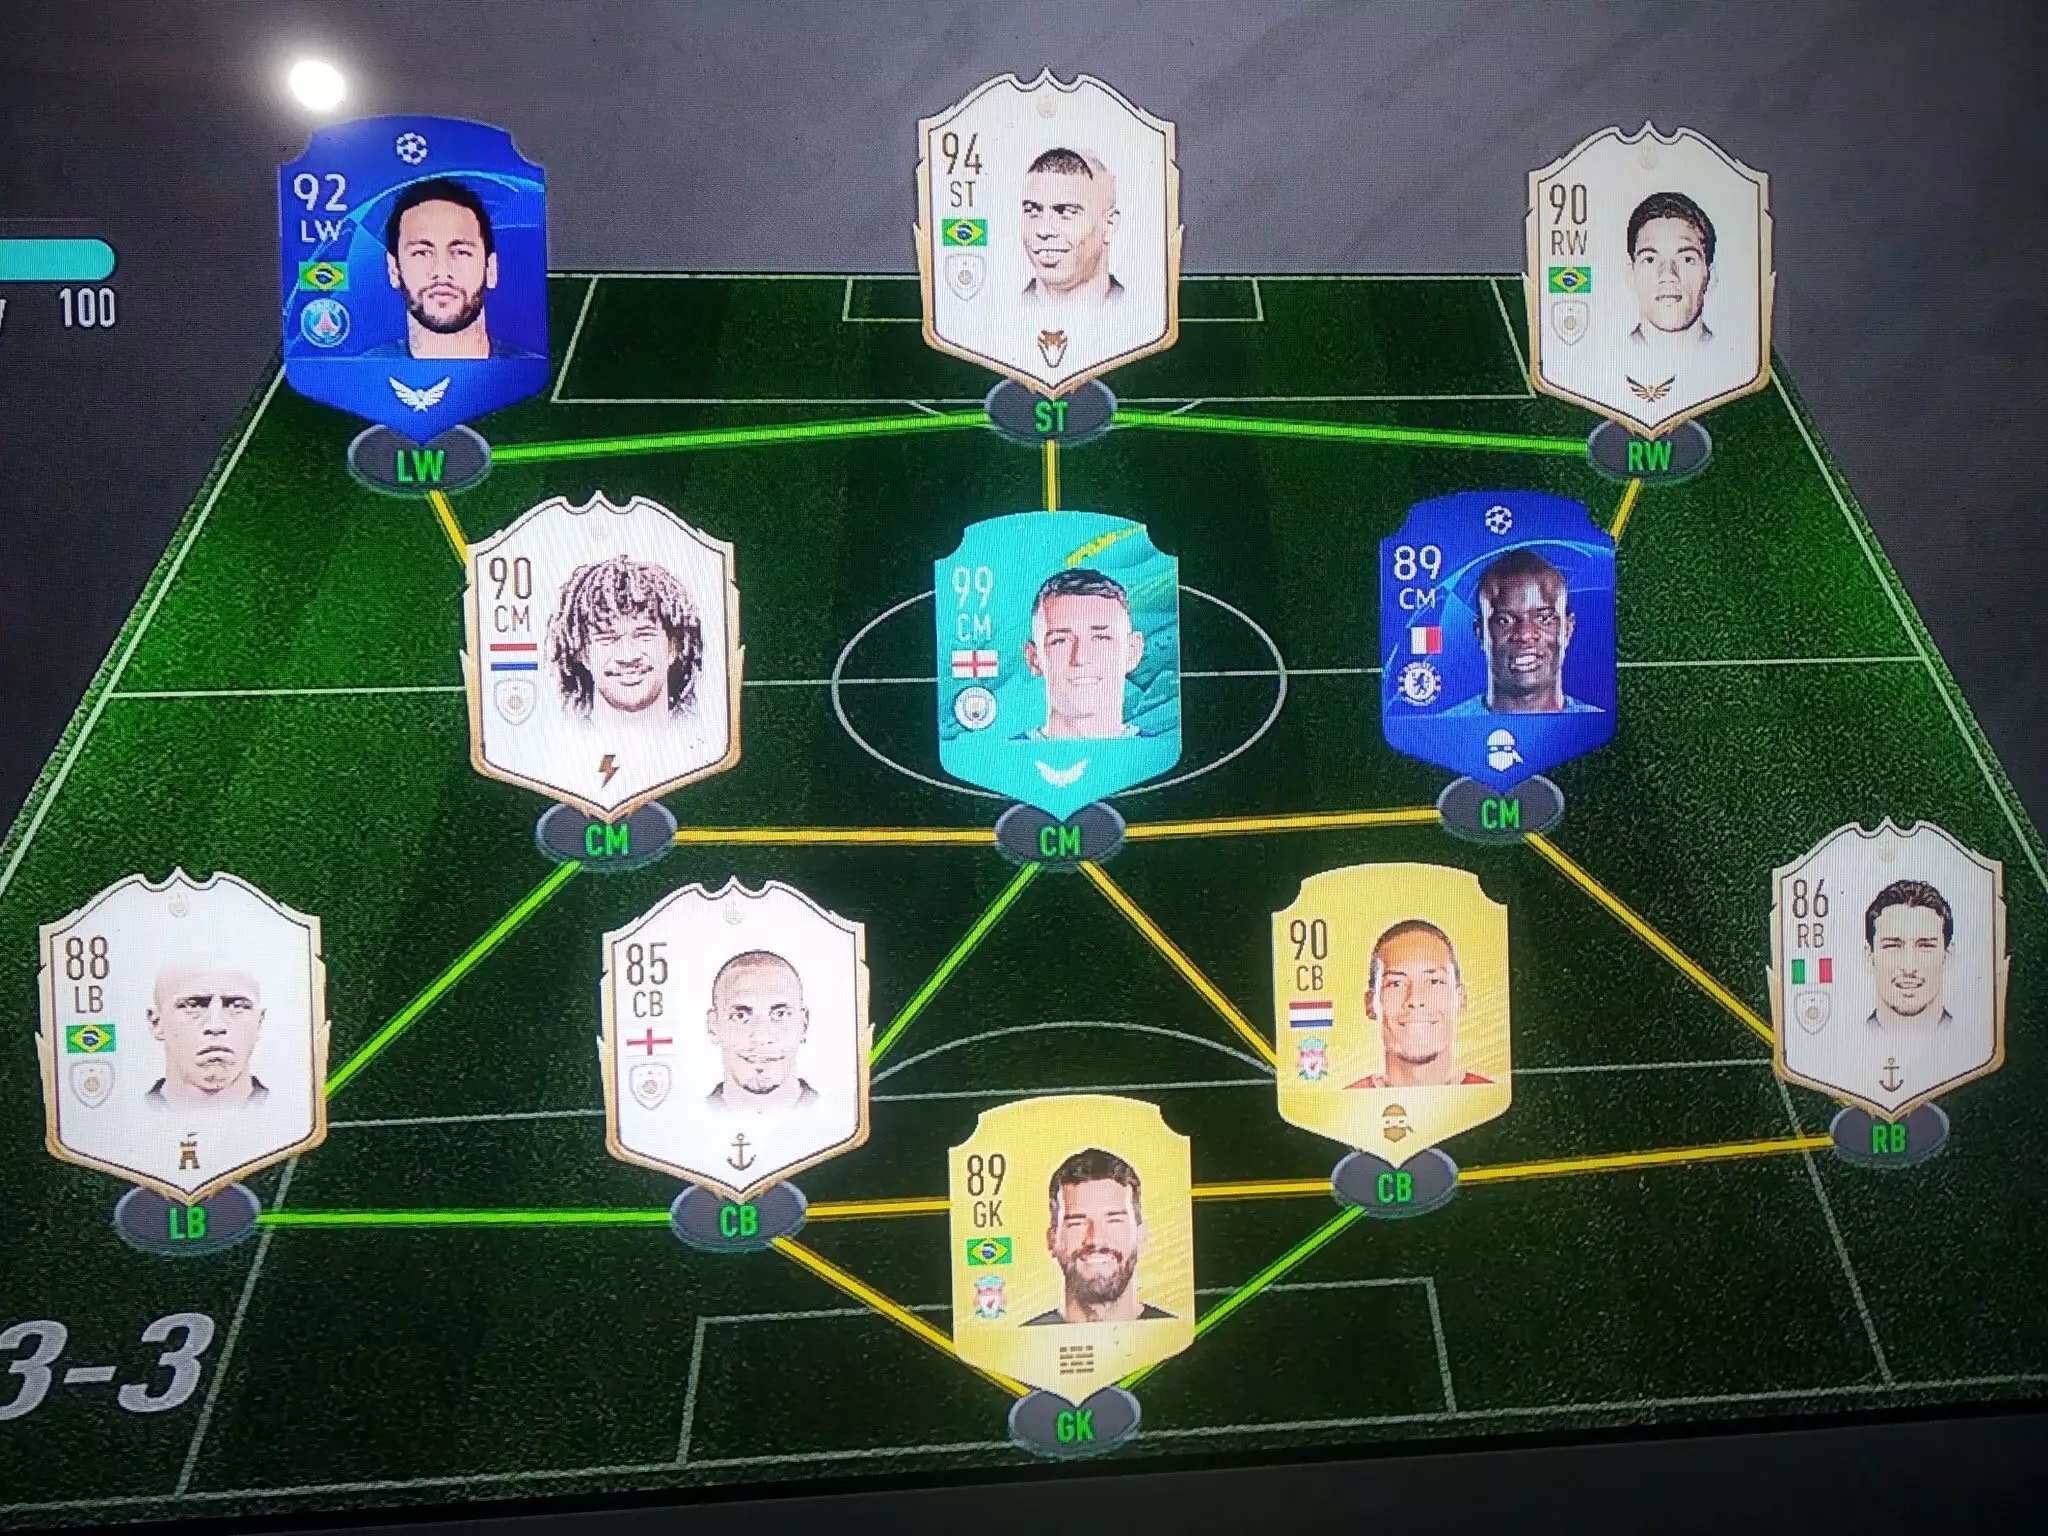 Foden's Ultimate Team featuring his own 99 rated card.